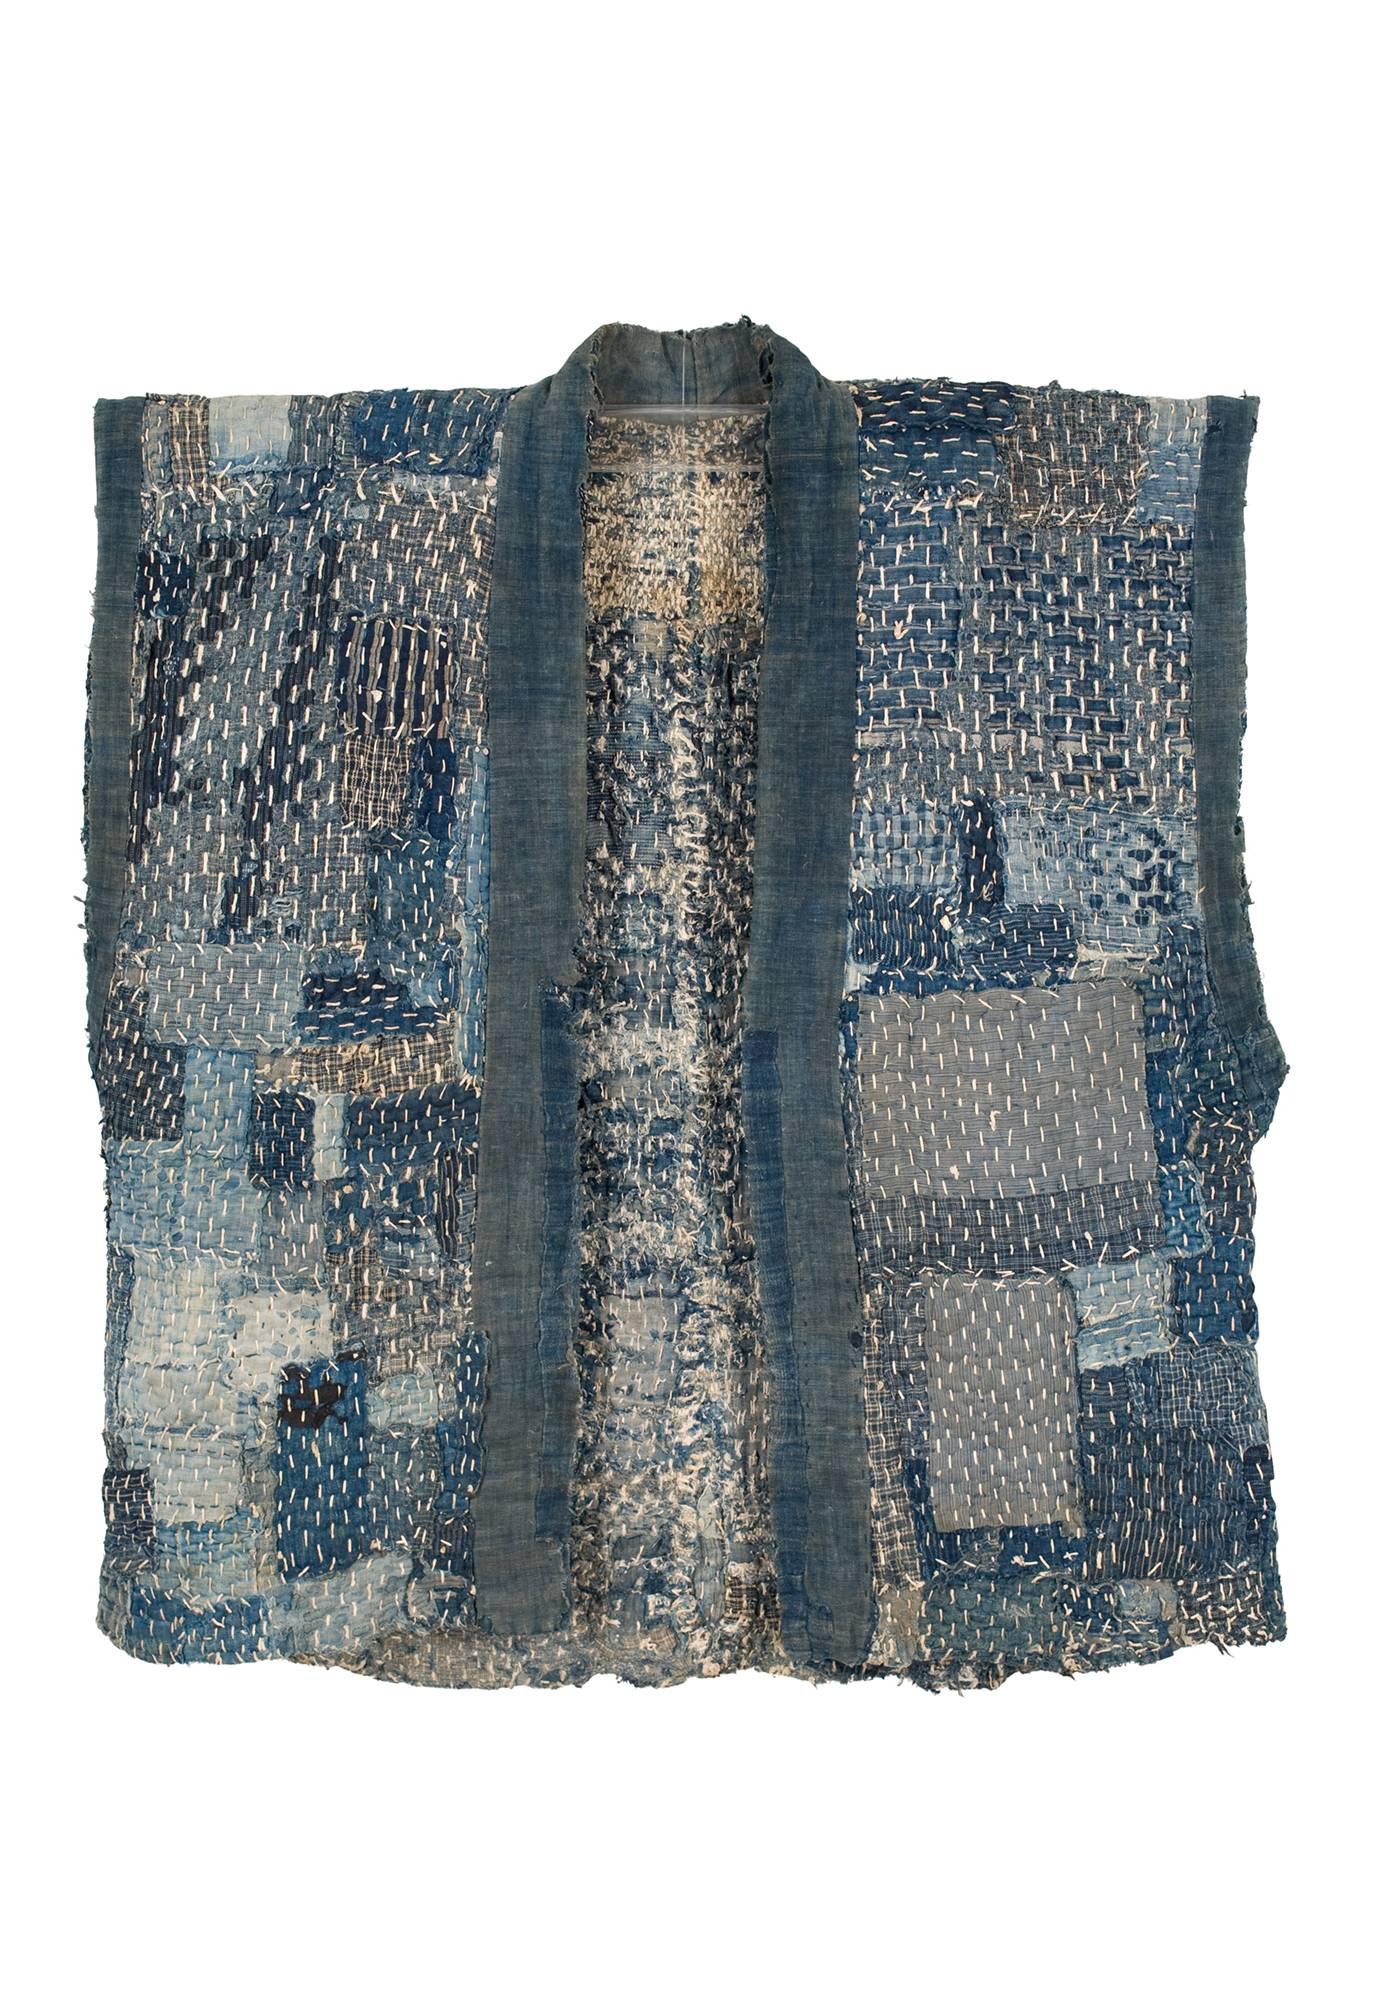 Offered by JOHN RUDDY
Indigo-dyed cotton patchwork farmer’s vest, Japan, from the late 19th Century

A superb example of the resourcefulness required of Japanese rural life in the late 1900s.  Original condition.